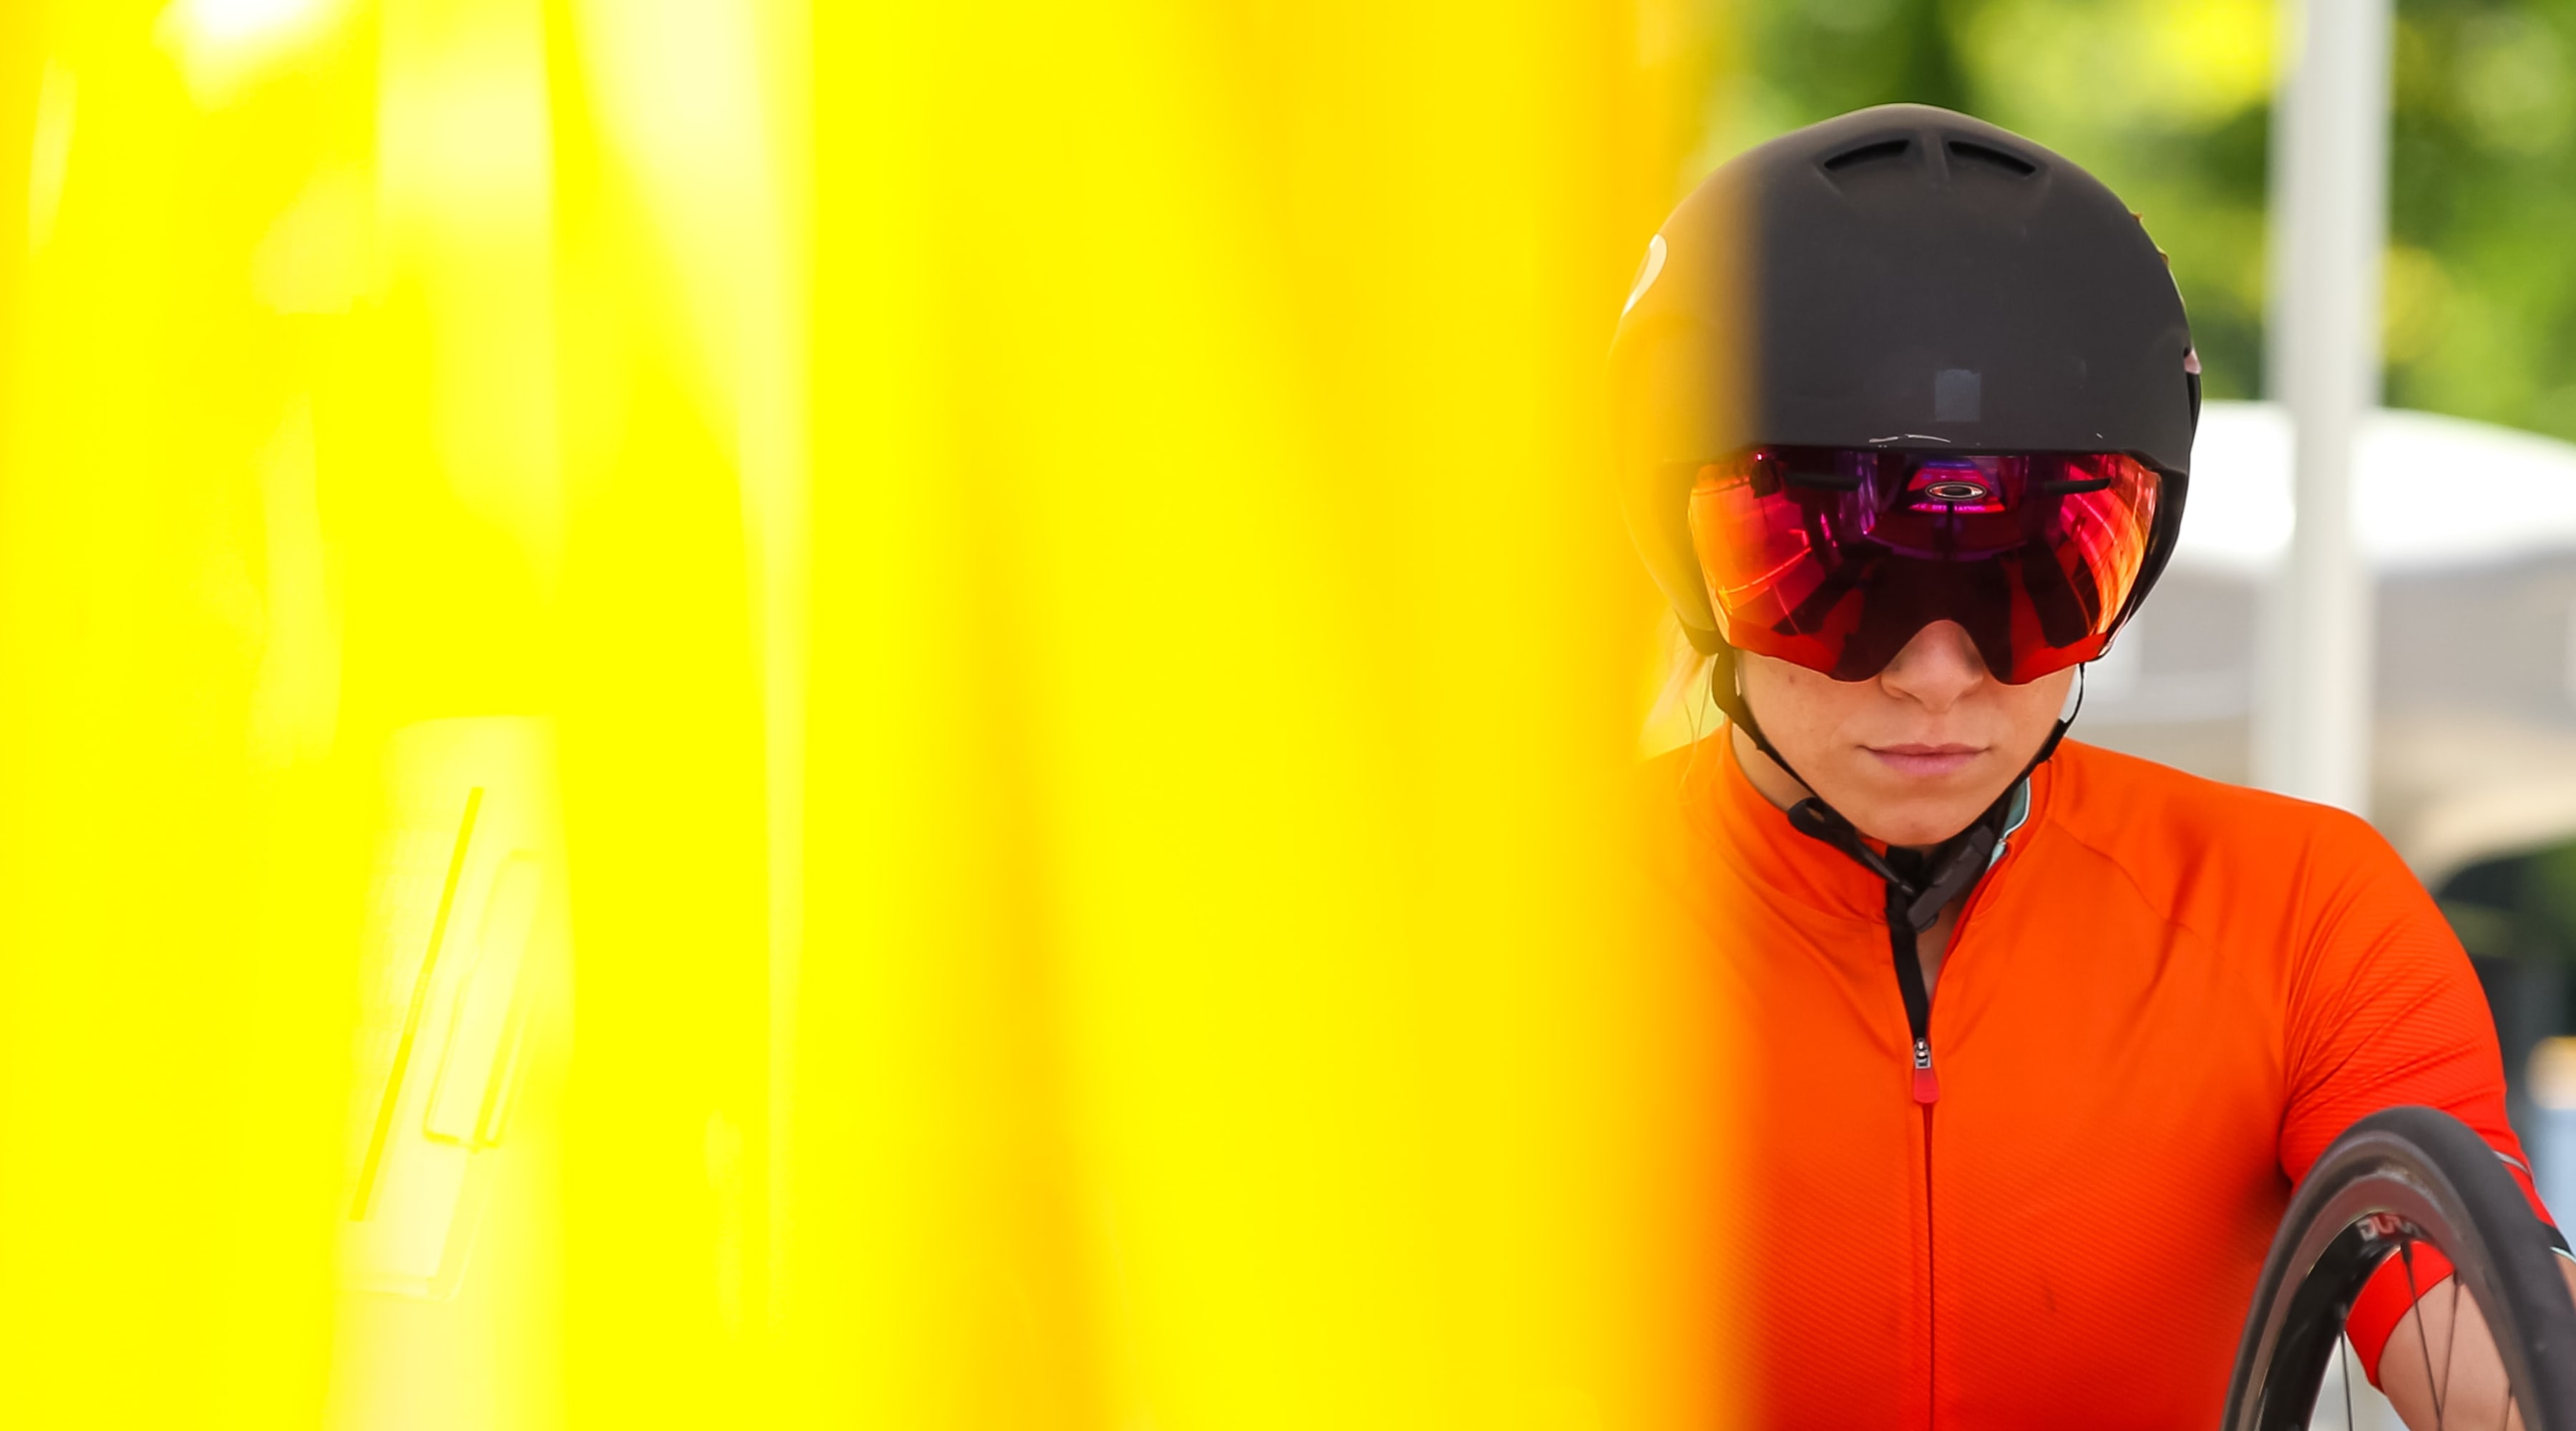 Oksana Masters of the United States looks on before competing in the WH4-5 17.0 km Course time trial during the 2021 U.S. Paralympic Trials at Gold Medal Park on June 19, 2021 in Minneapolis, Minnesota.